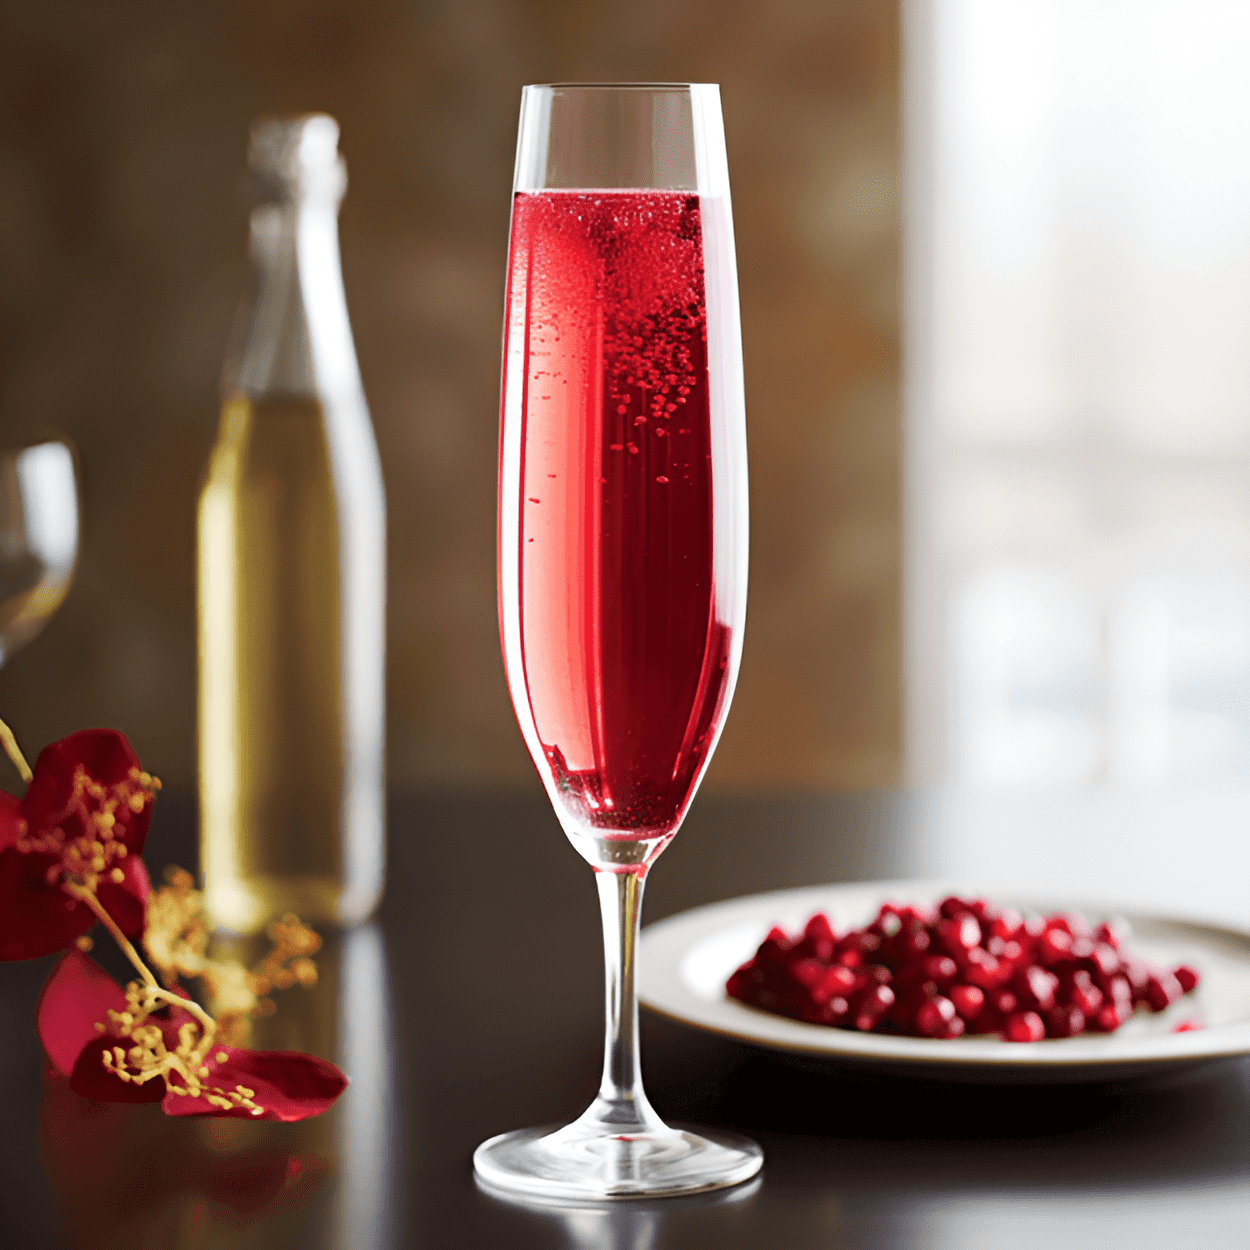 Pomegranate French 75 Cocktail Recipe - The Pomegranate French 75 is a bubbly, refreshing cocktail with a perfect balance of sweet and tart. The pomegranate juice adds a fruity depth, while the champagne brings a crisp, effervescent finish. The gin and lemon juice provide a sharp, tangy undertone.